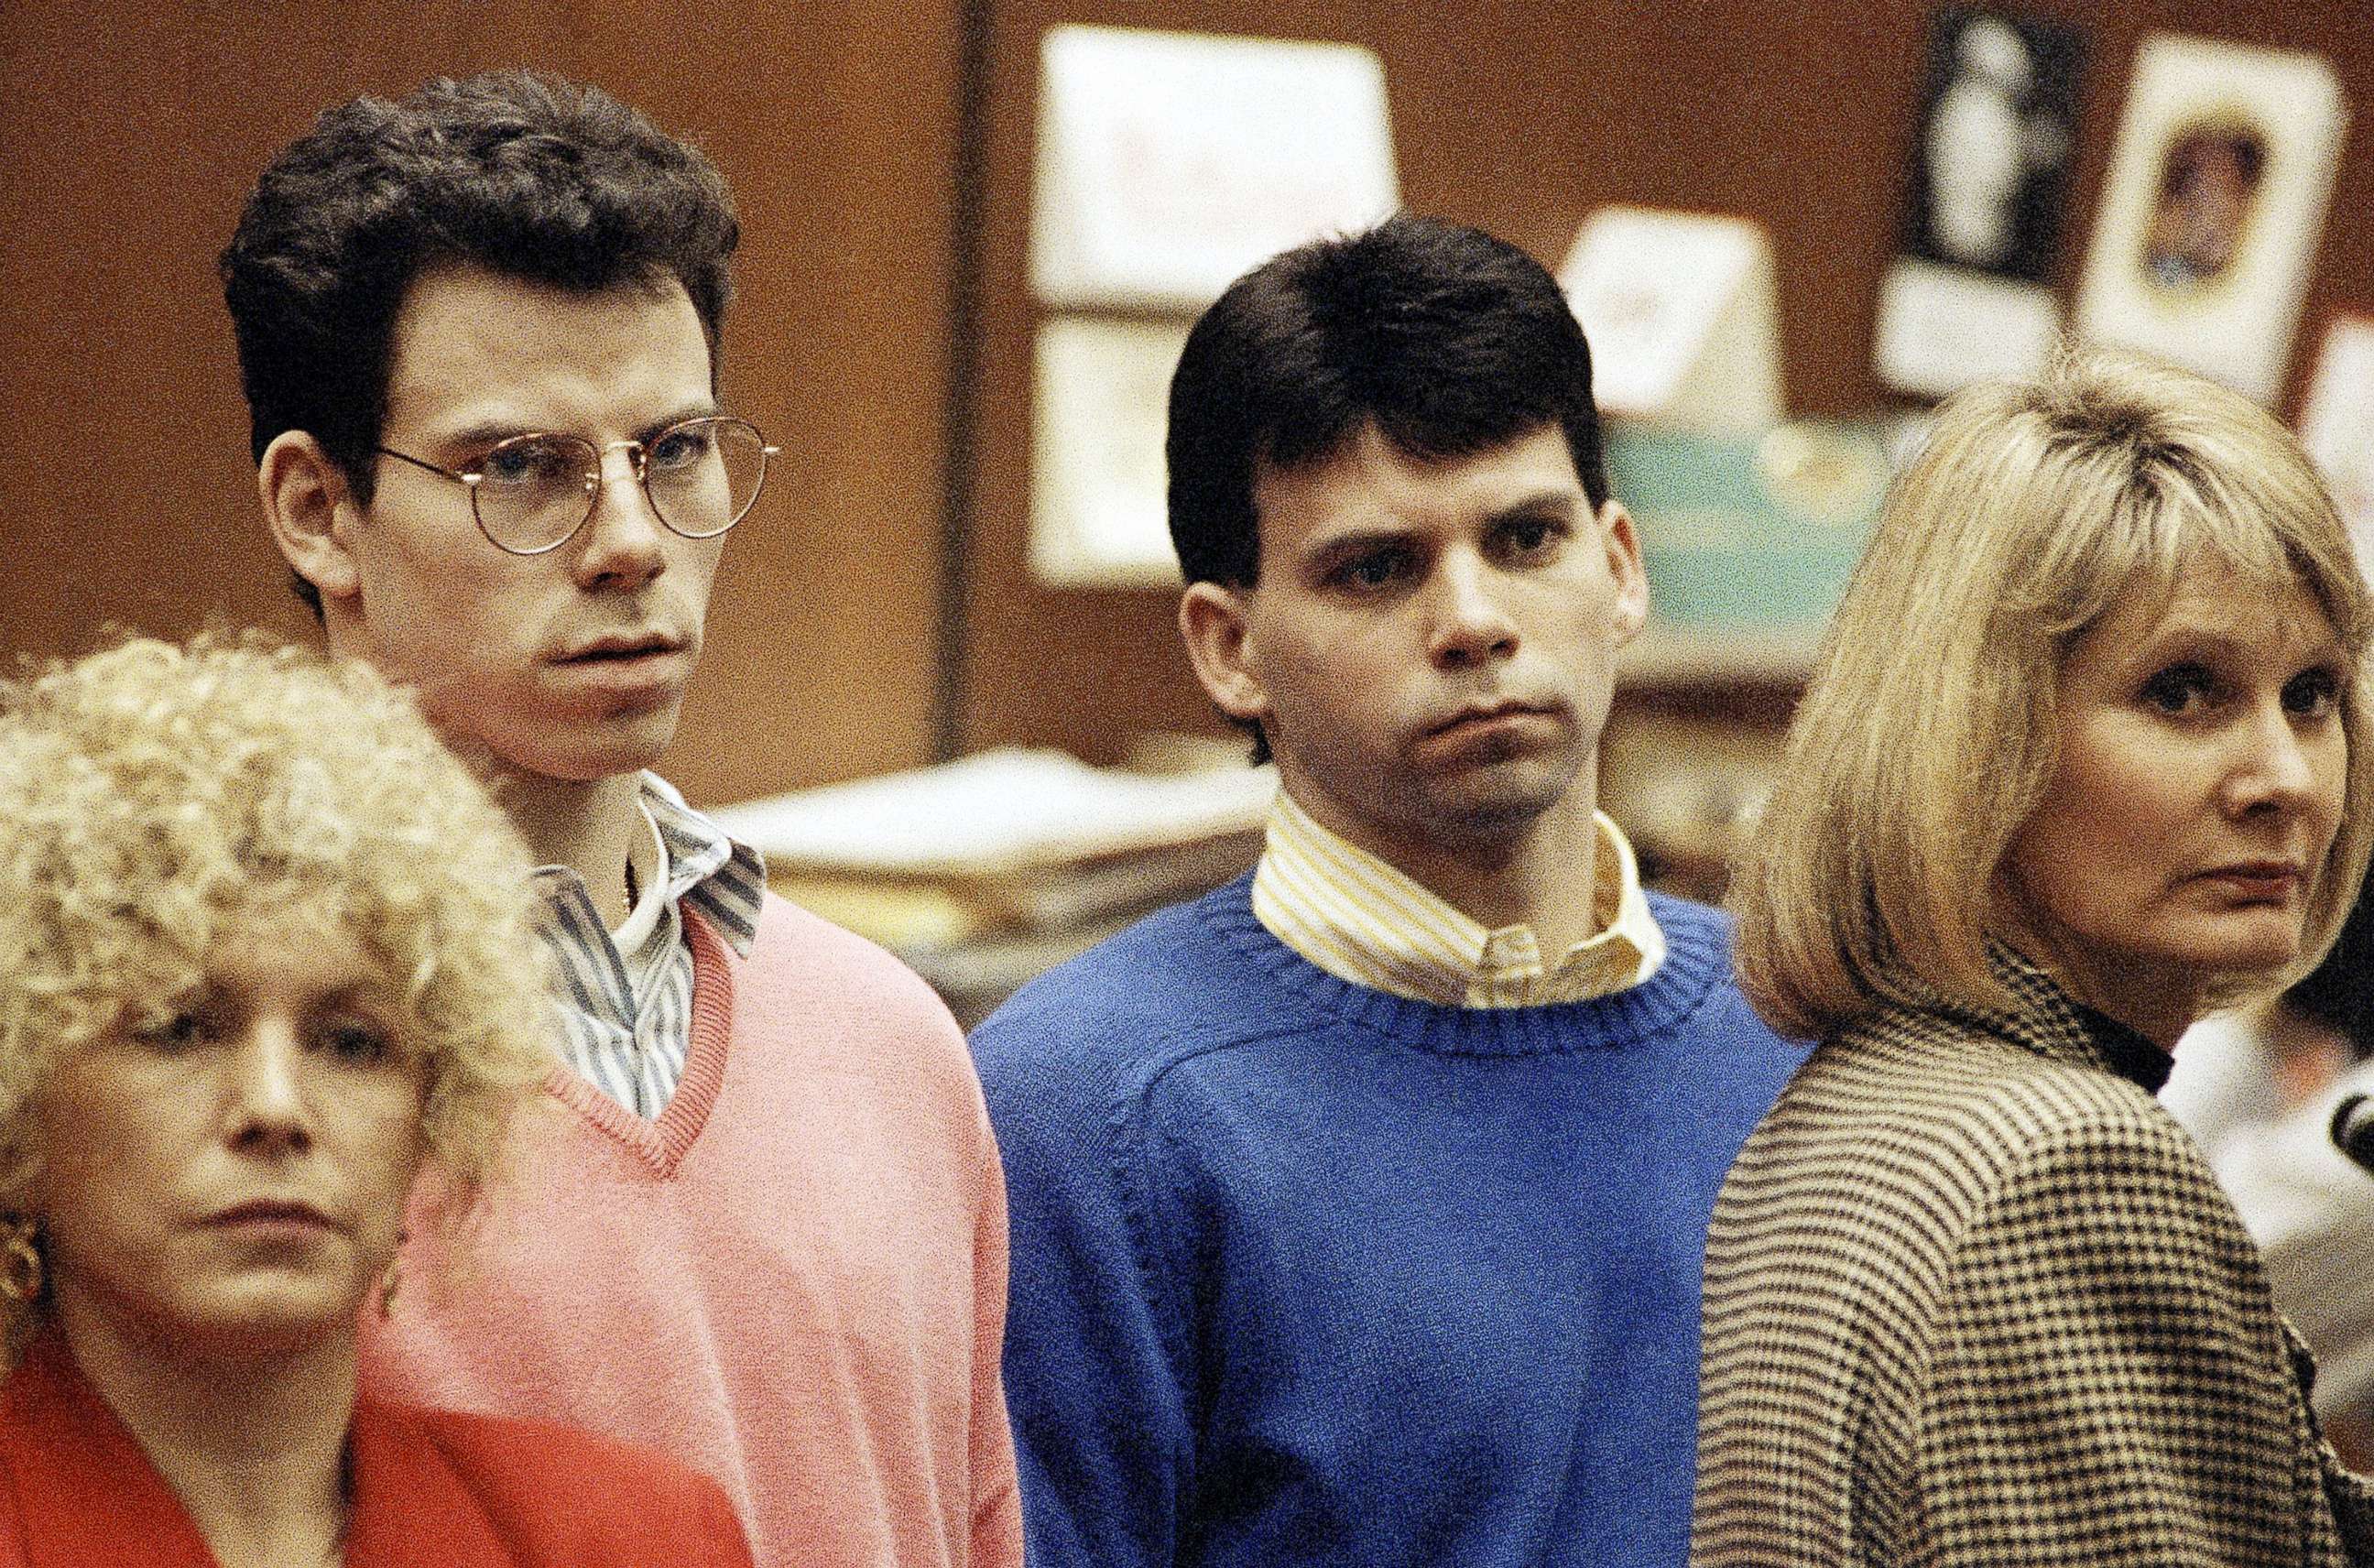 The Menendez brothers are back in the zeitgeist thanks to teens on TikTok Reporters Notebook image